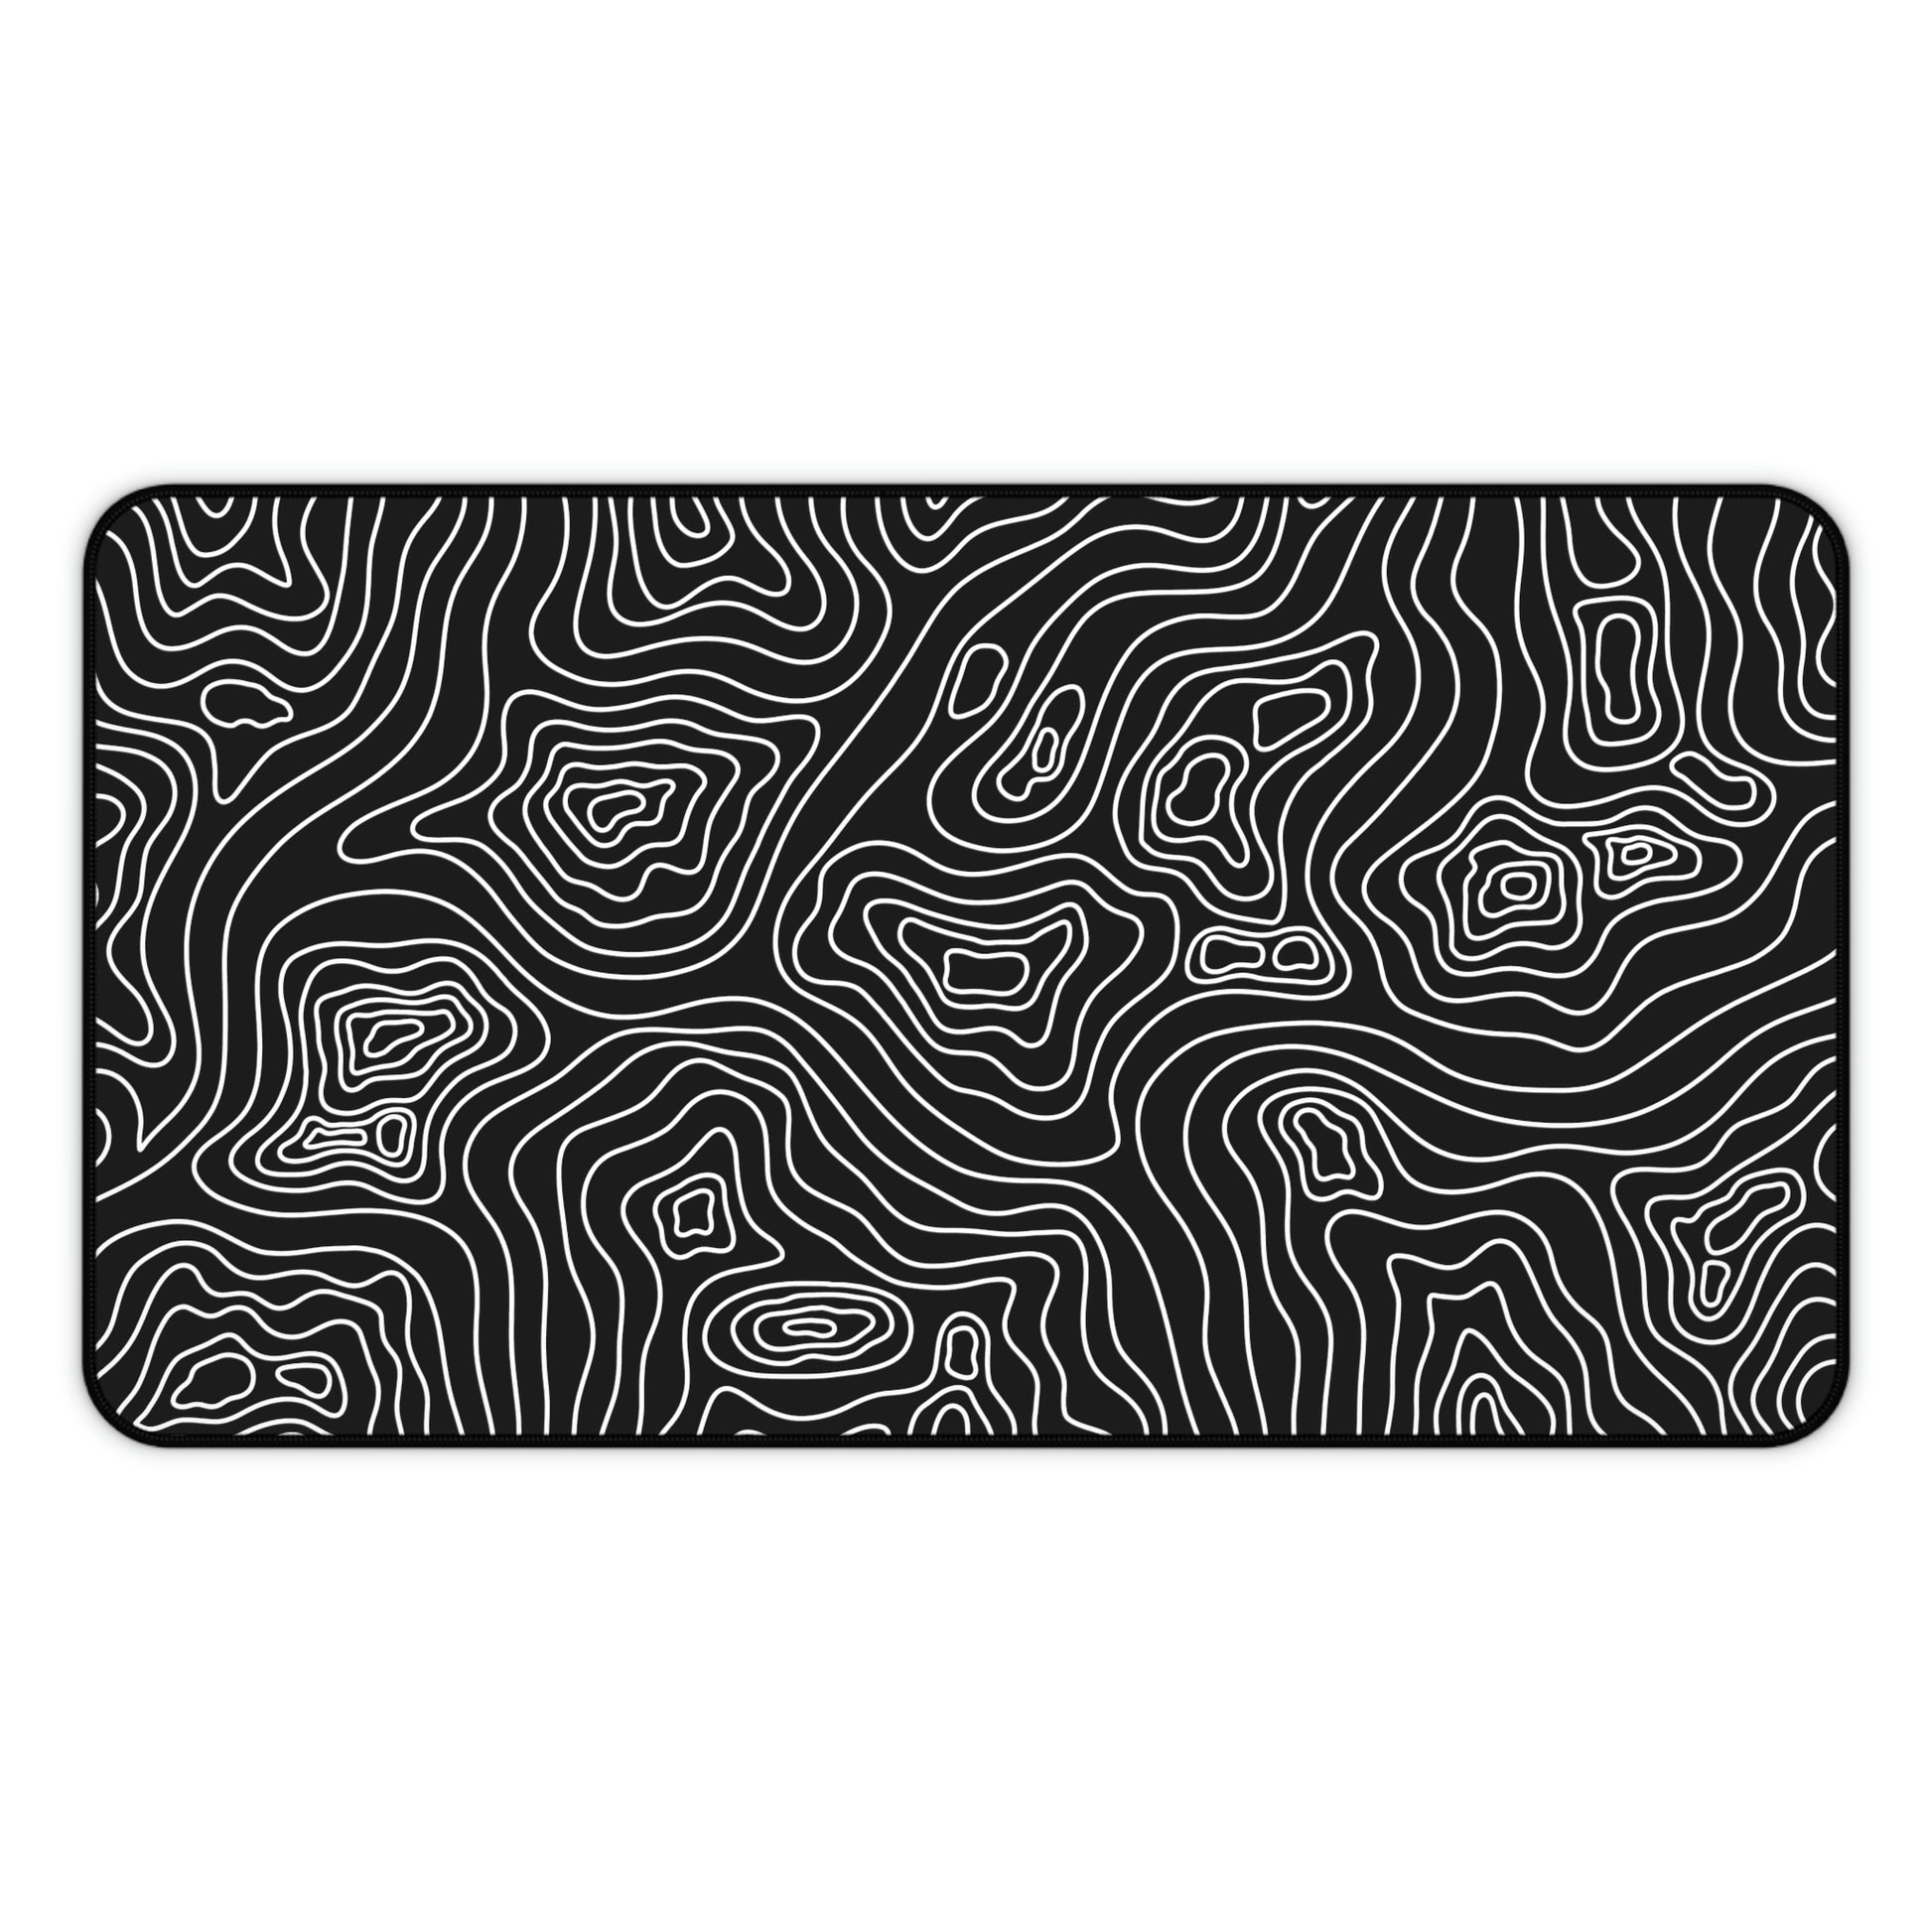 A 12" x 22" black desk mat with white topographic lines.